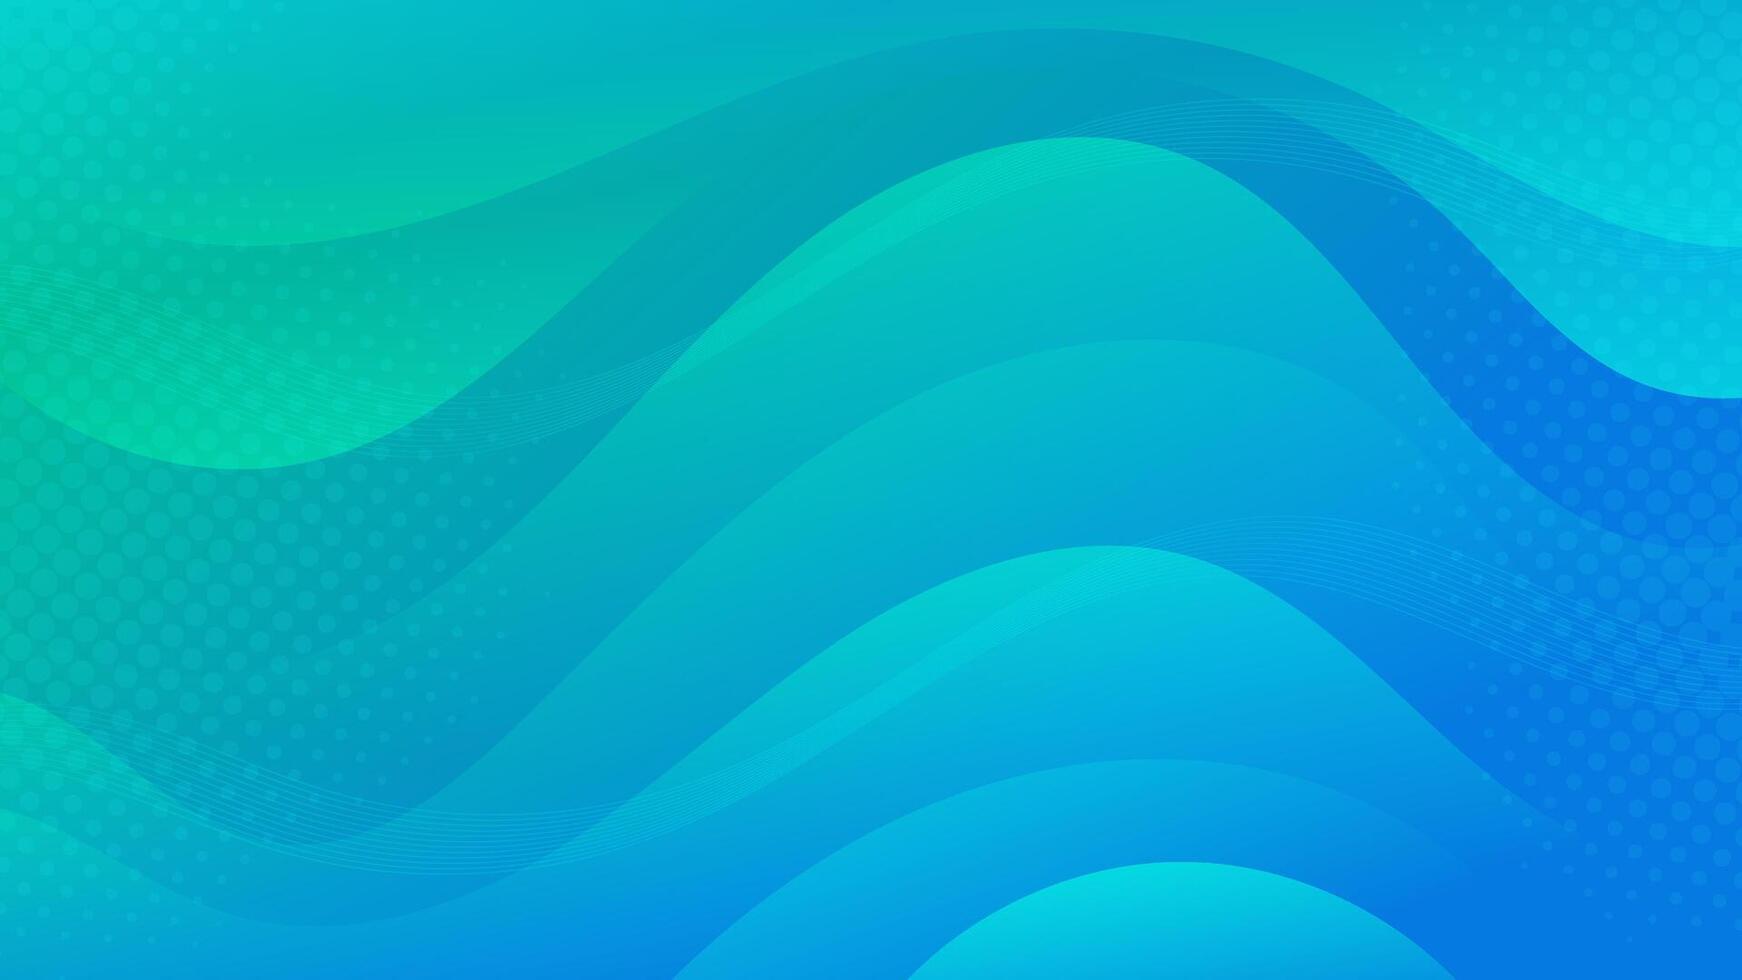 Abstract blue Green Background with Wavy Shapes. flowing and curvy shapes. This asset is suitable for website backgrounds, flyers, posters, and digital art projects. vector